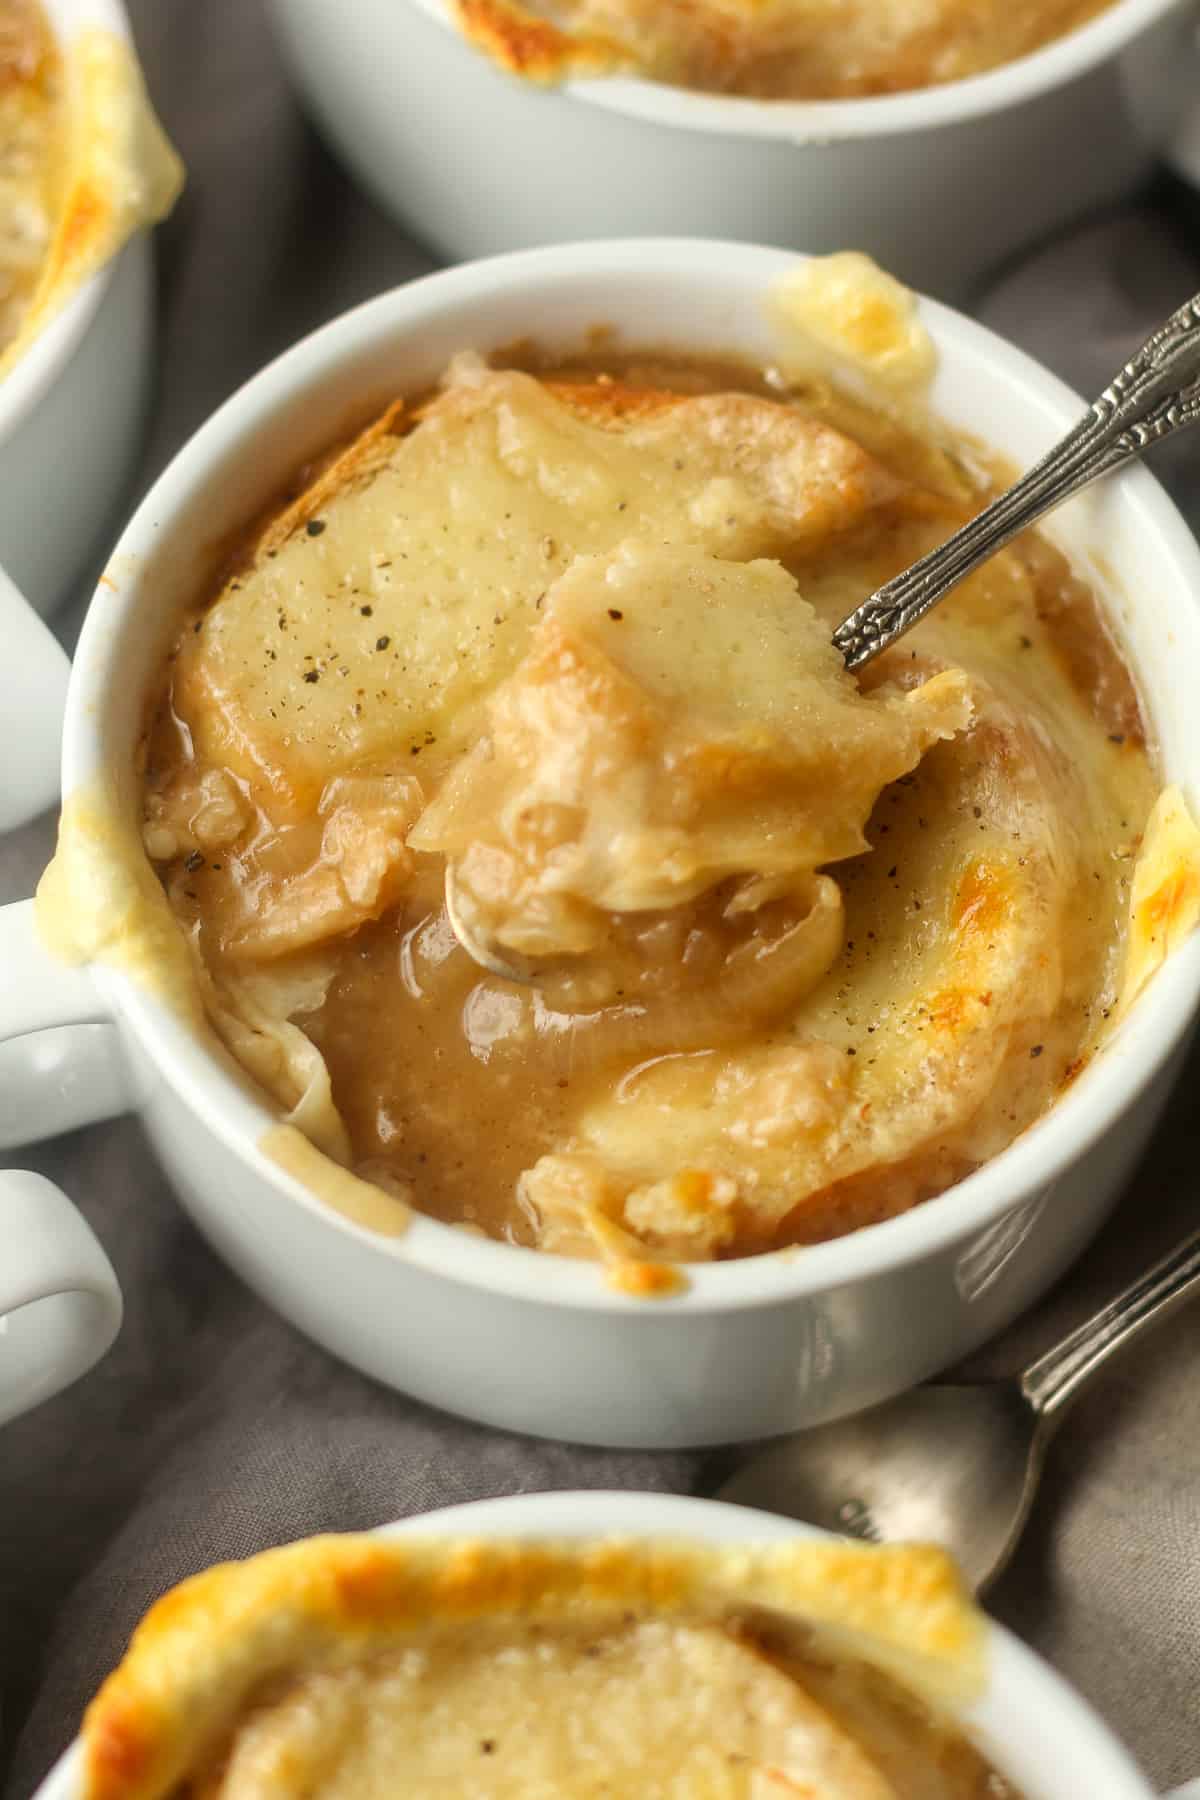 Side view of mugs of French Onion Soup, one showing a large bite out.